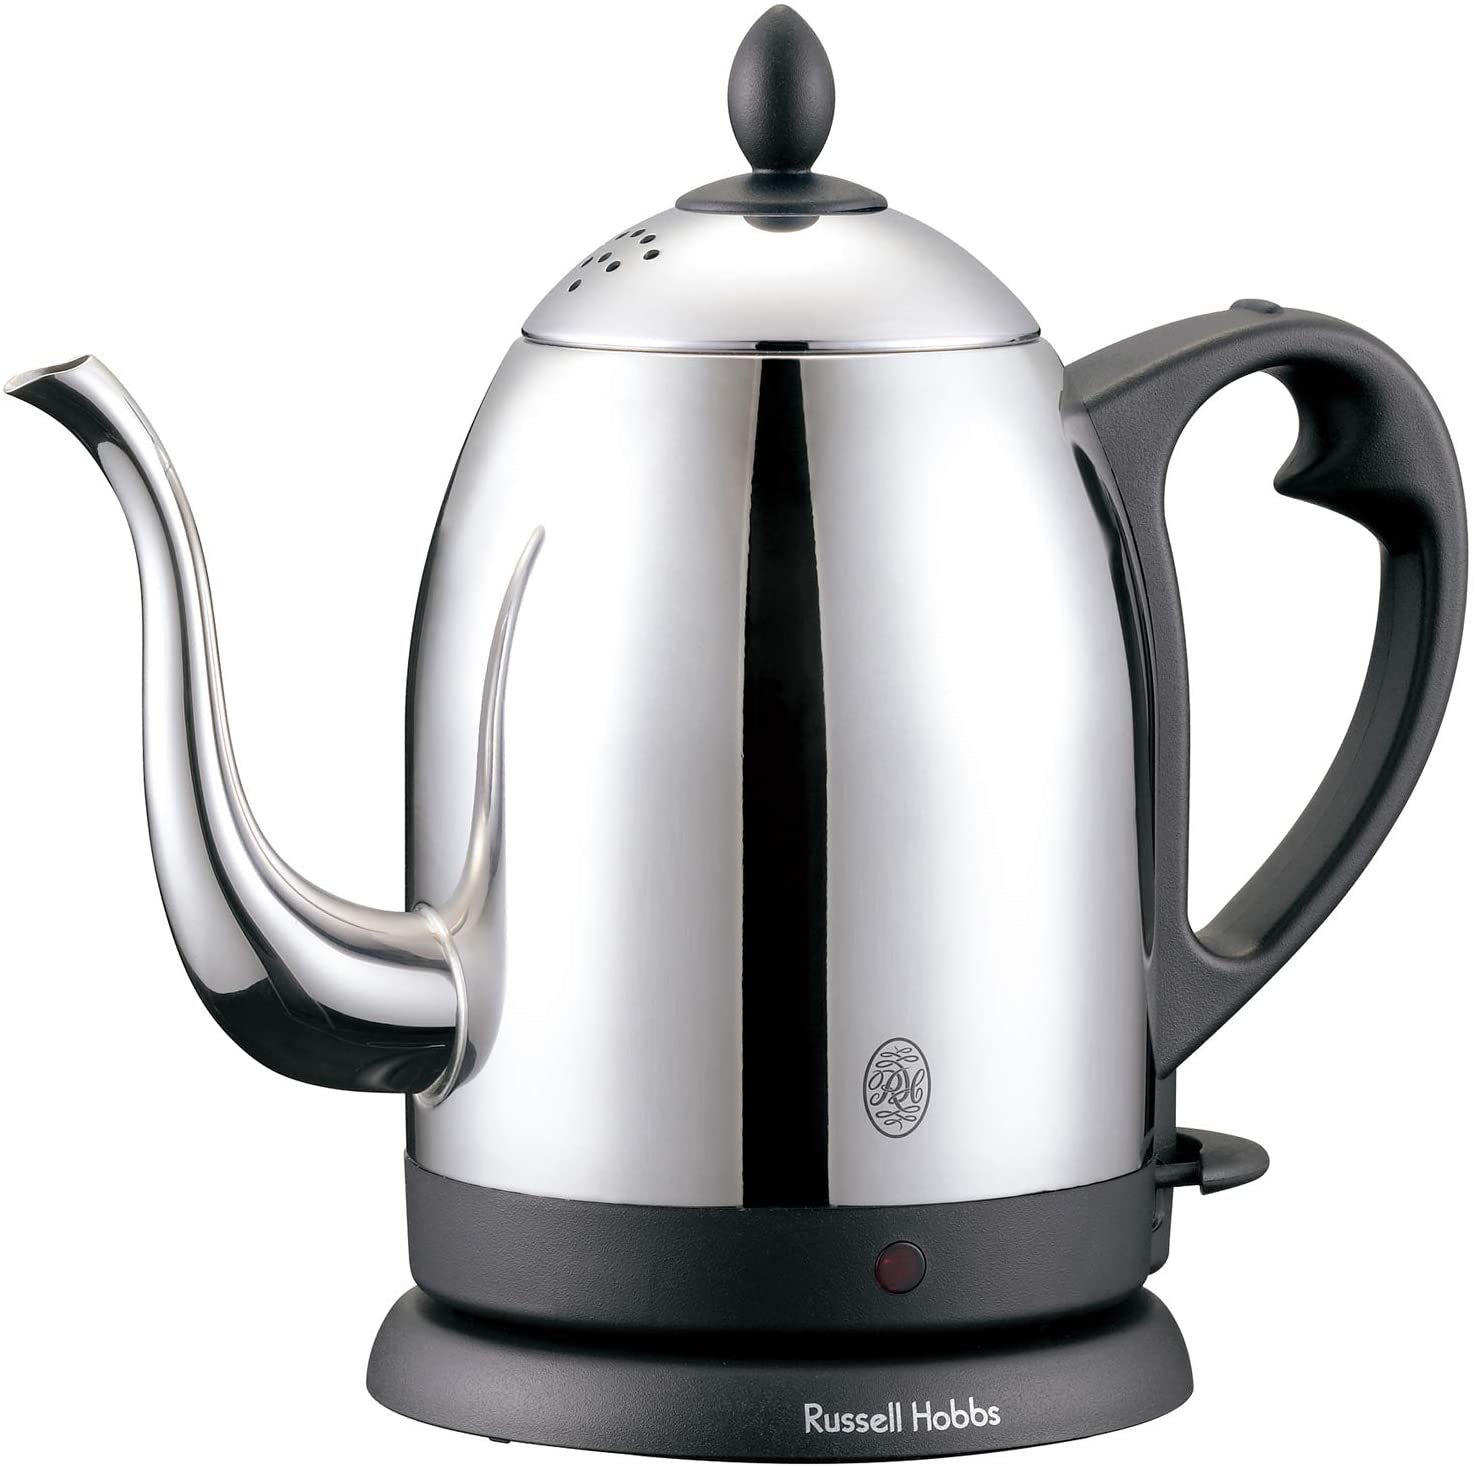 Russell Hobbs(ラッセルホブス) Cafe Kettle 7410JP